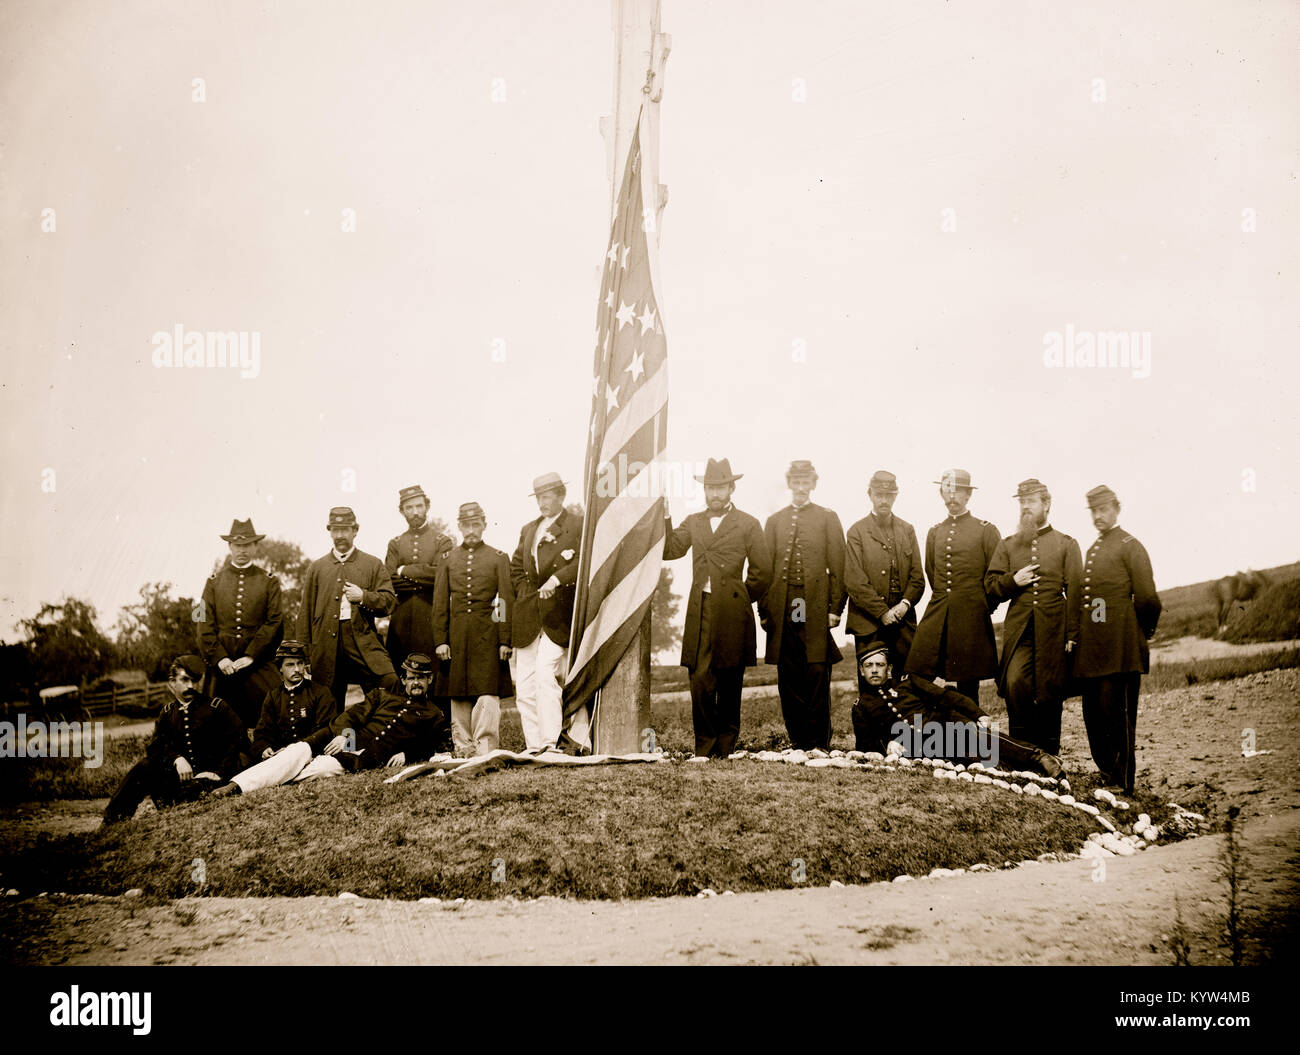 Washington, D.C. Signal Corps officers lowering flag at their camp near Georgetown; Gen Albert J. Myer, in civilian dress, at right of pole Stock Photo